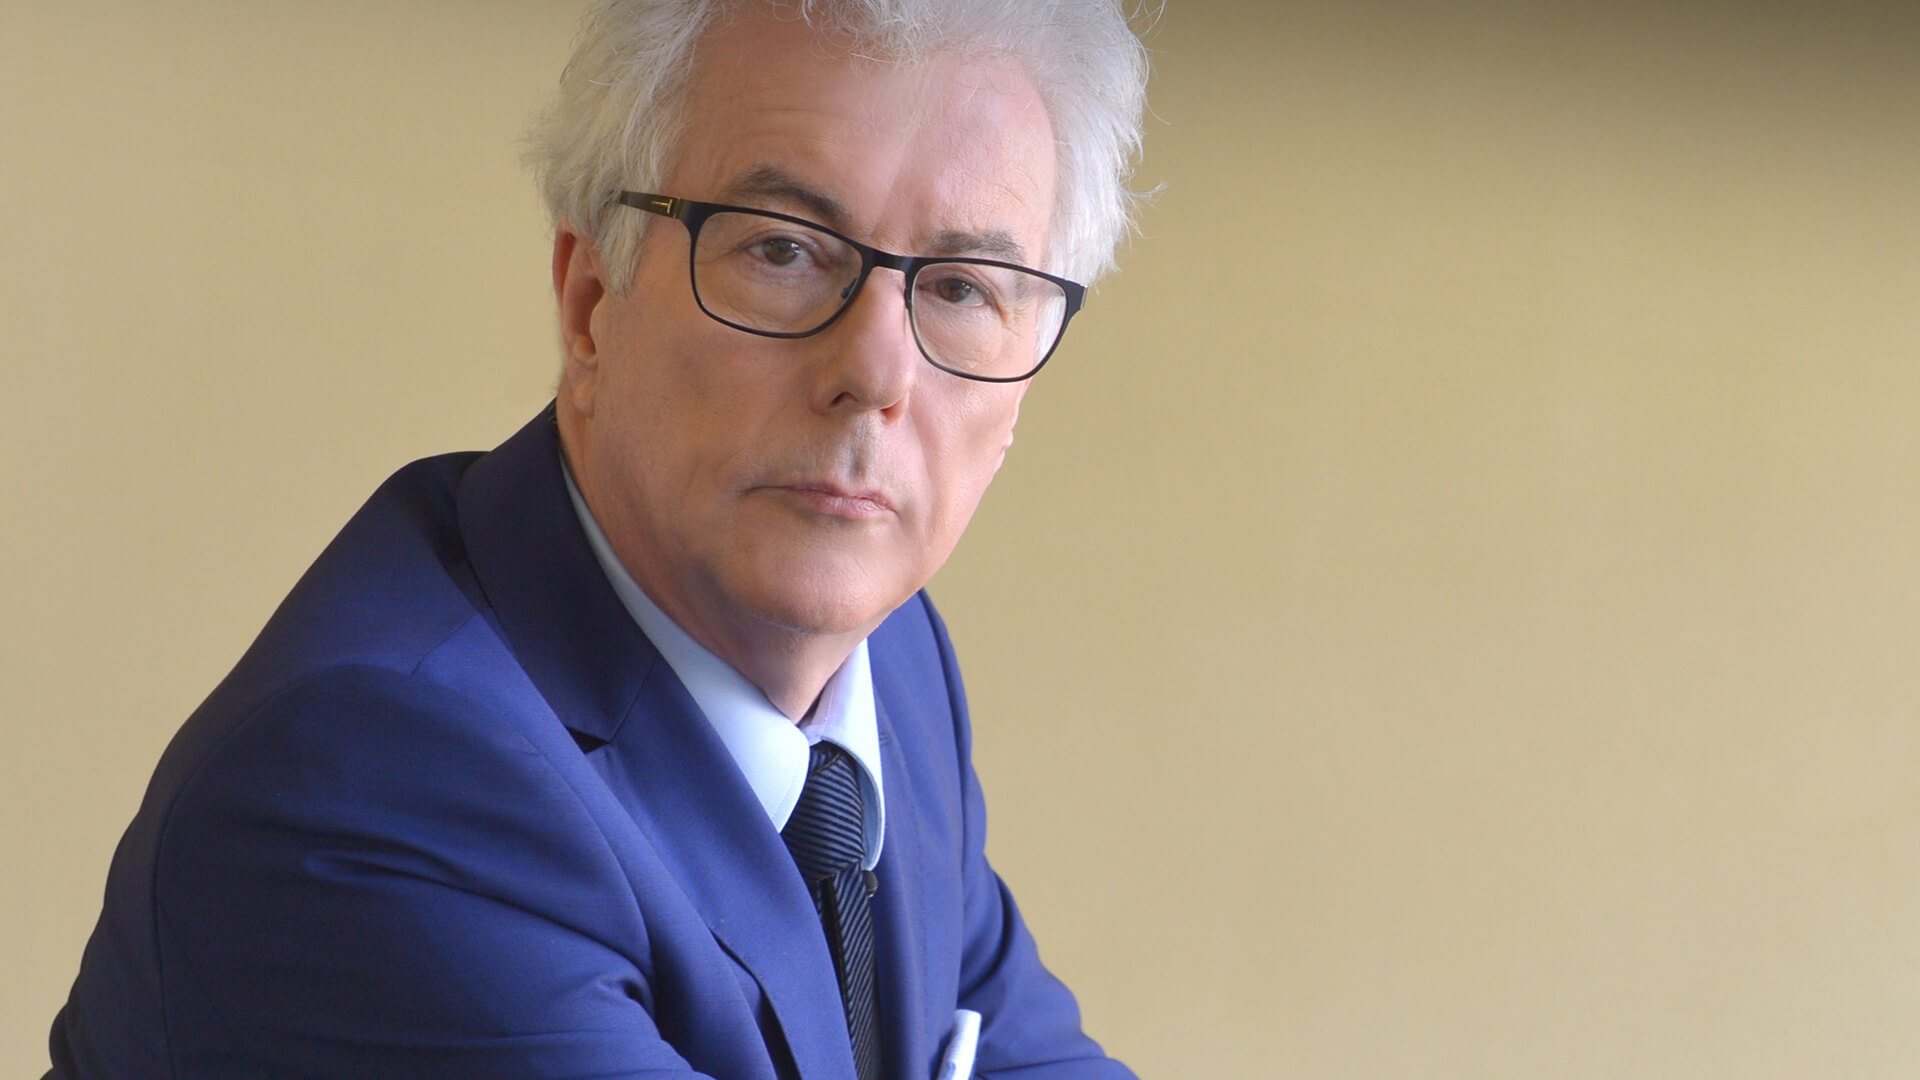 The Bookseller - Author Interviews - Ken Follett  'I didn't foresee this  becoming five books at all. If I had, I would have been more intimidated